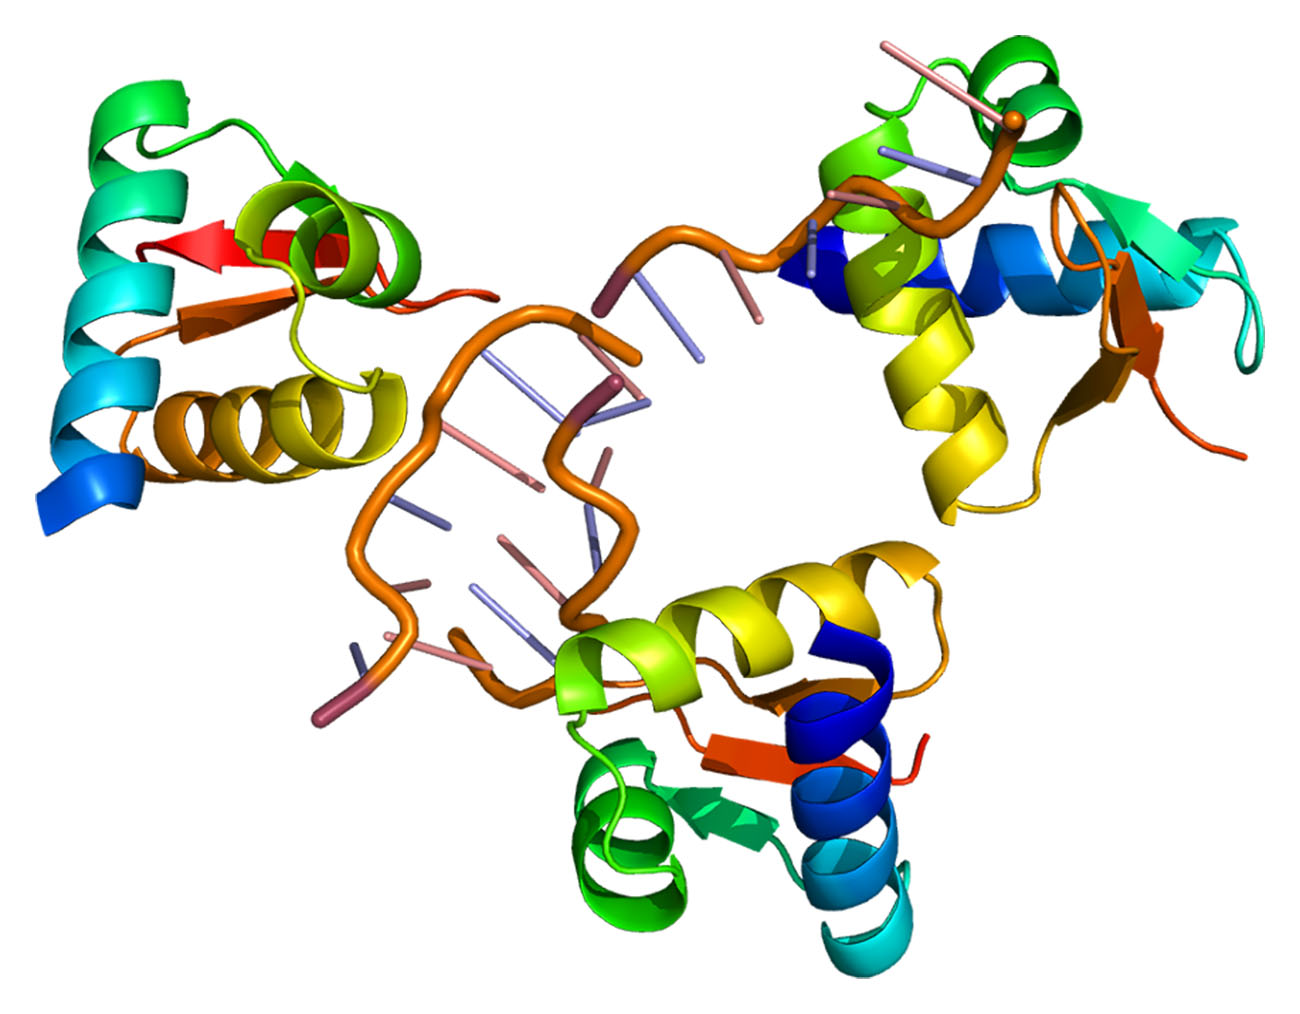 Continuous processing protein